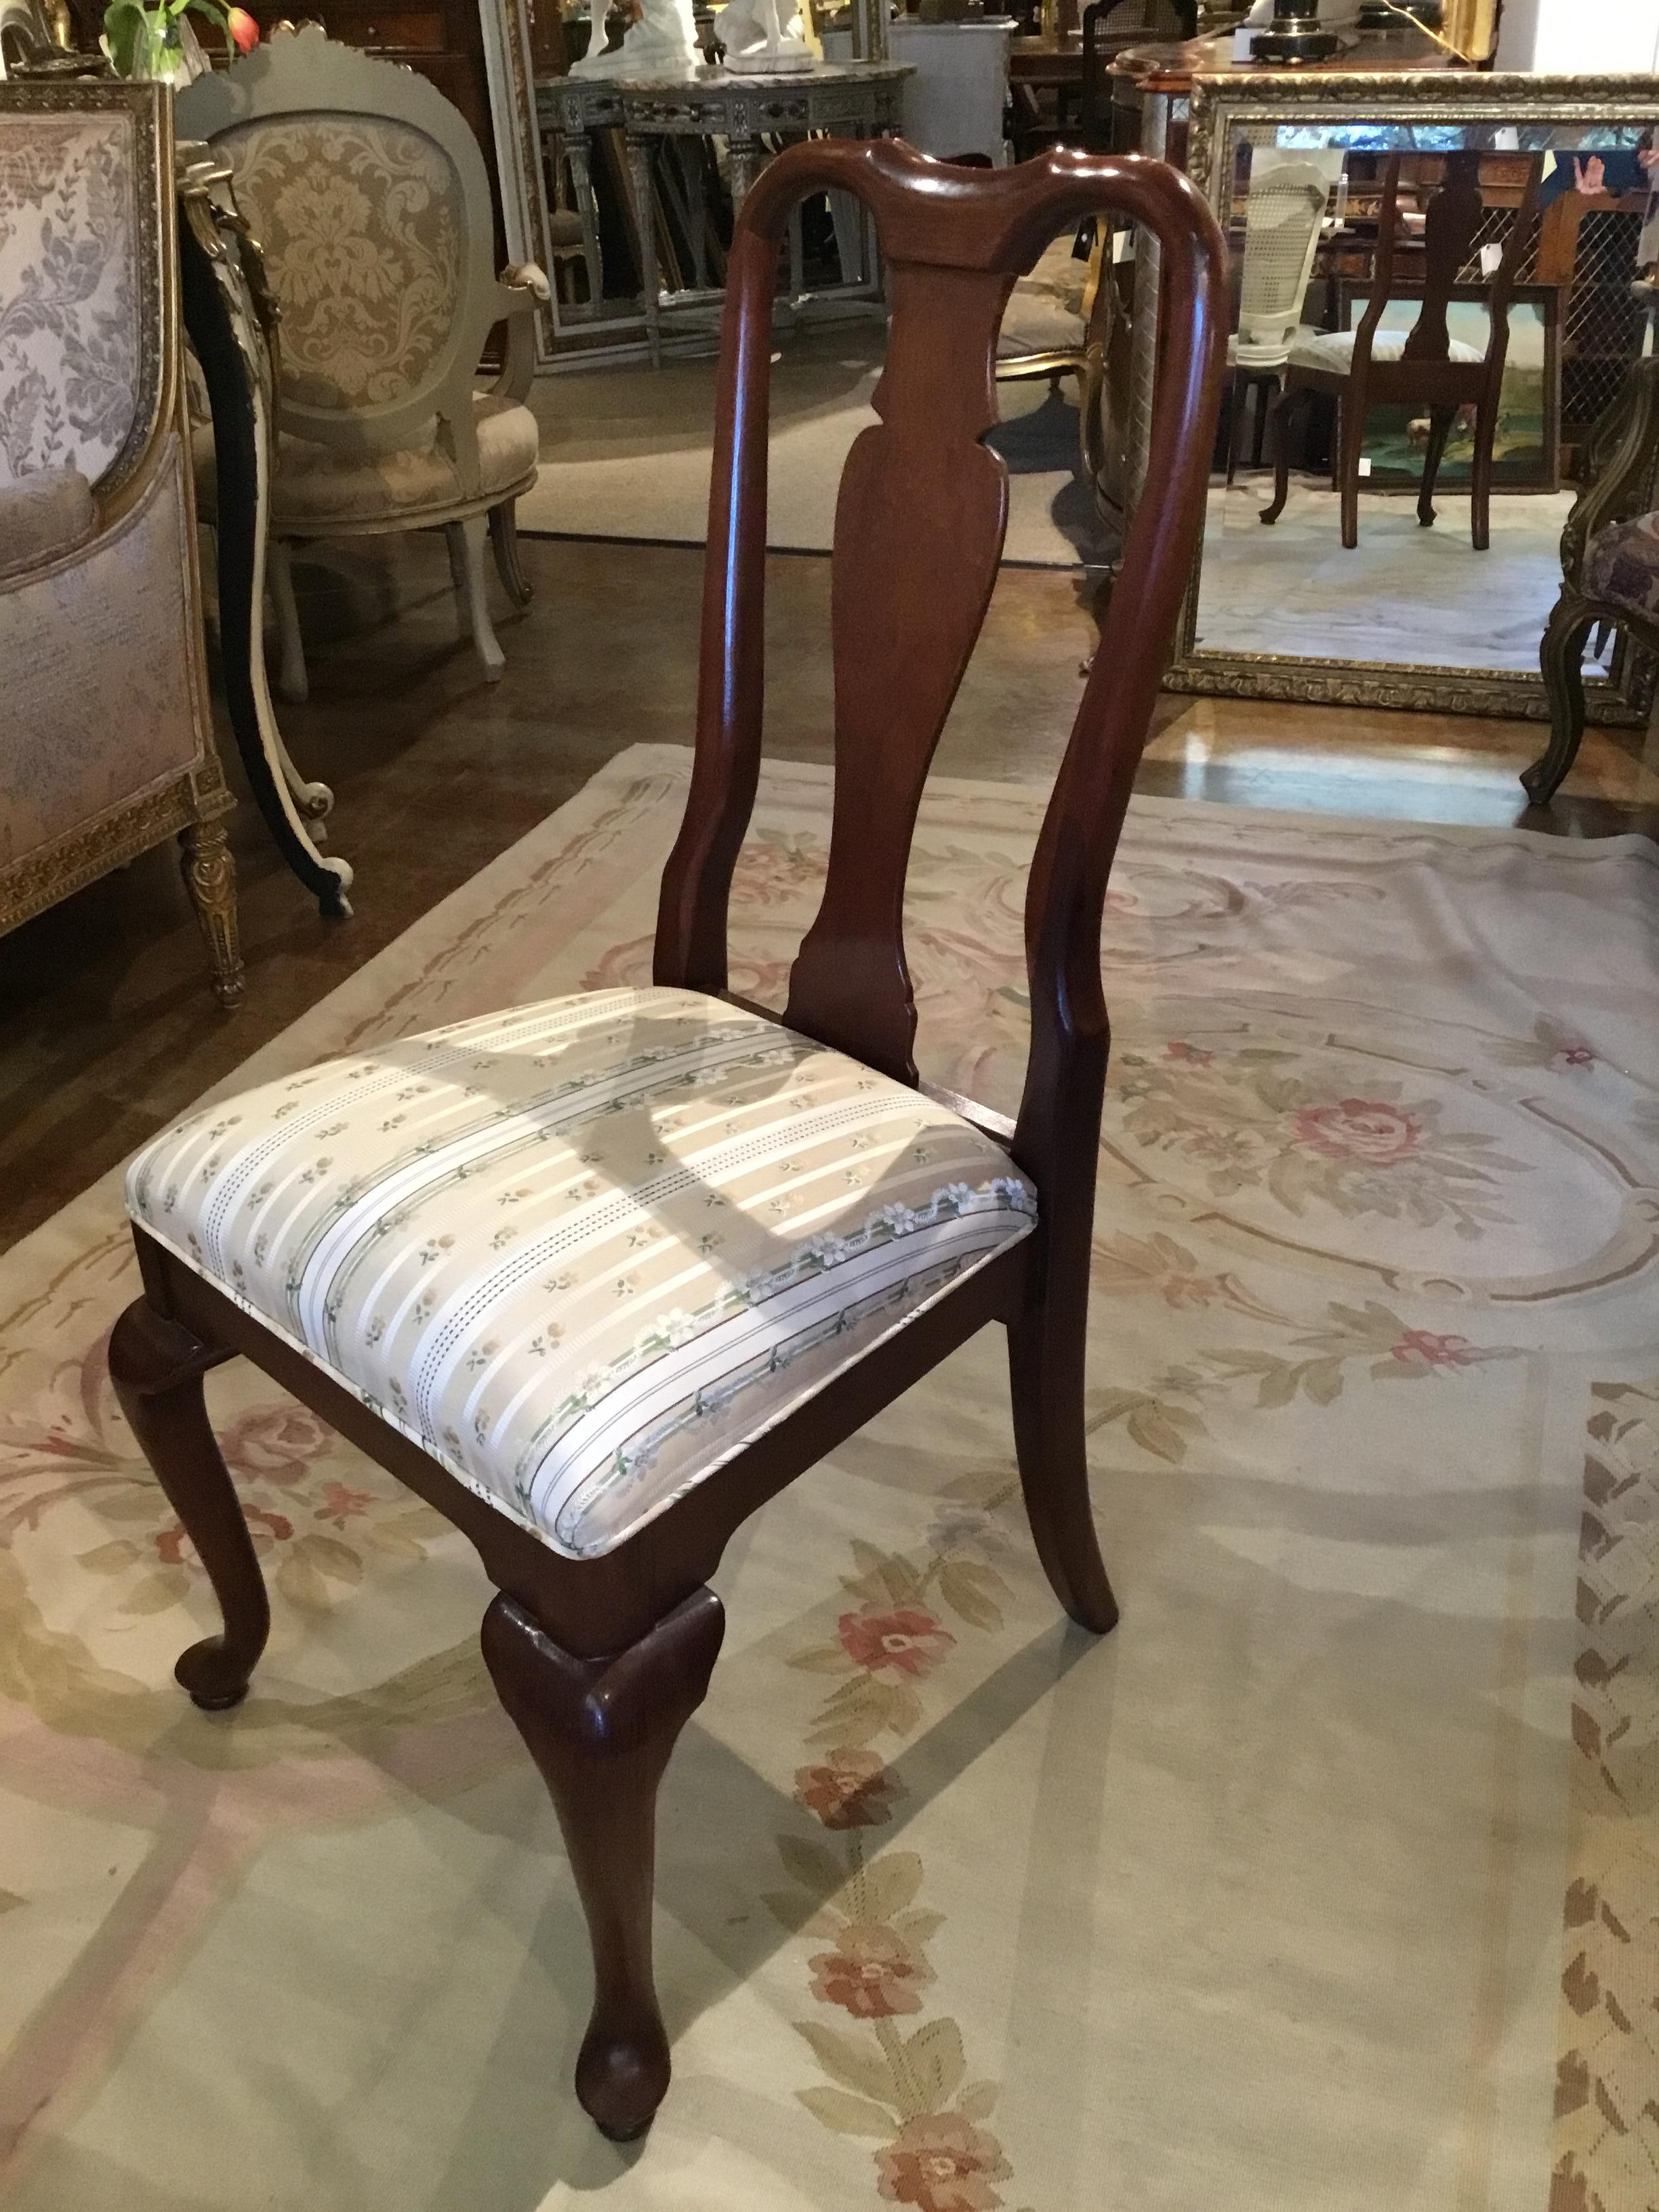 Lovely set of 8 mahogany Queen Anne style dining chairs with beautiful
Upholstered seats! This set consists of 6 side chairs and 2 armchairs
They are in beautiful condition without any structural problems and the
Finish is without scratches or